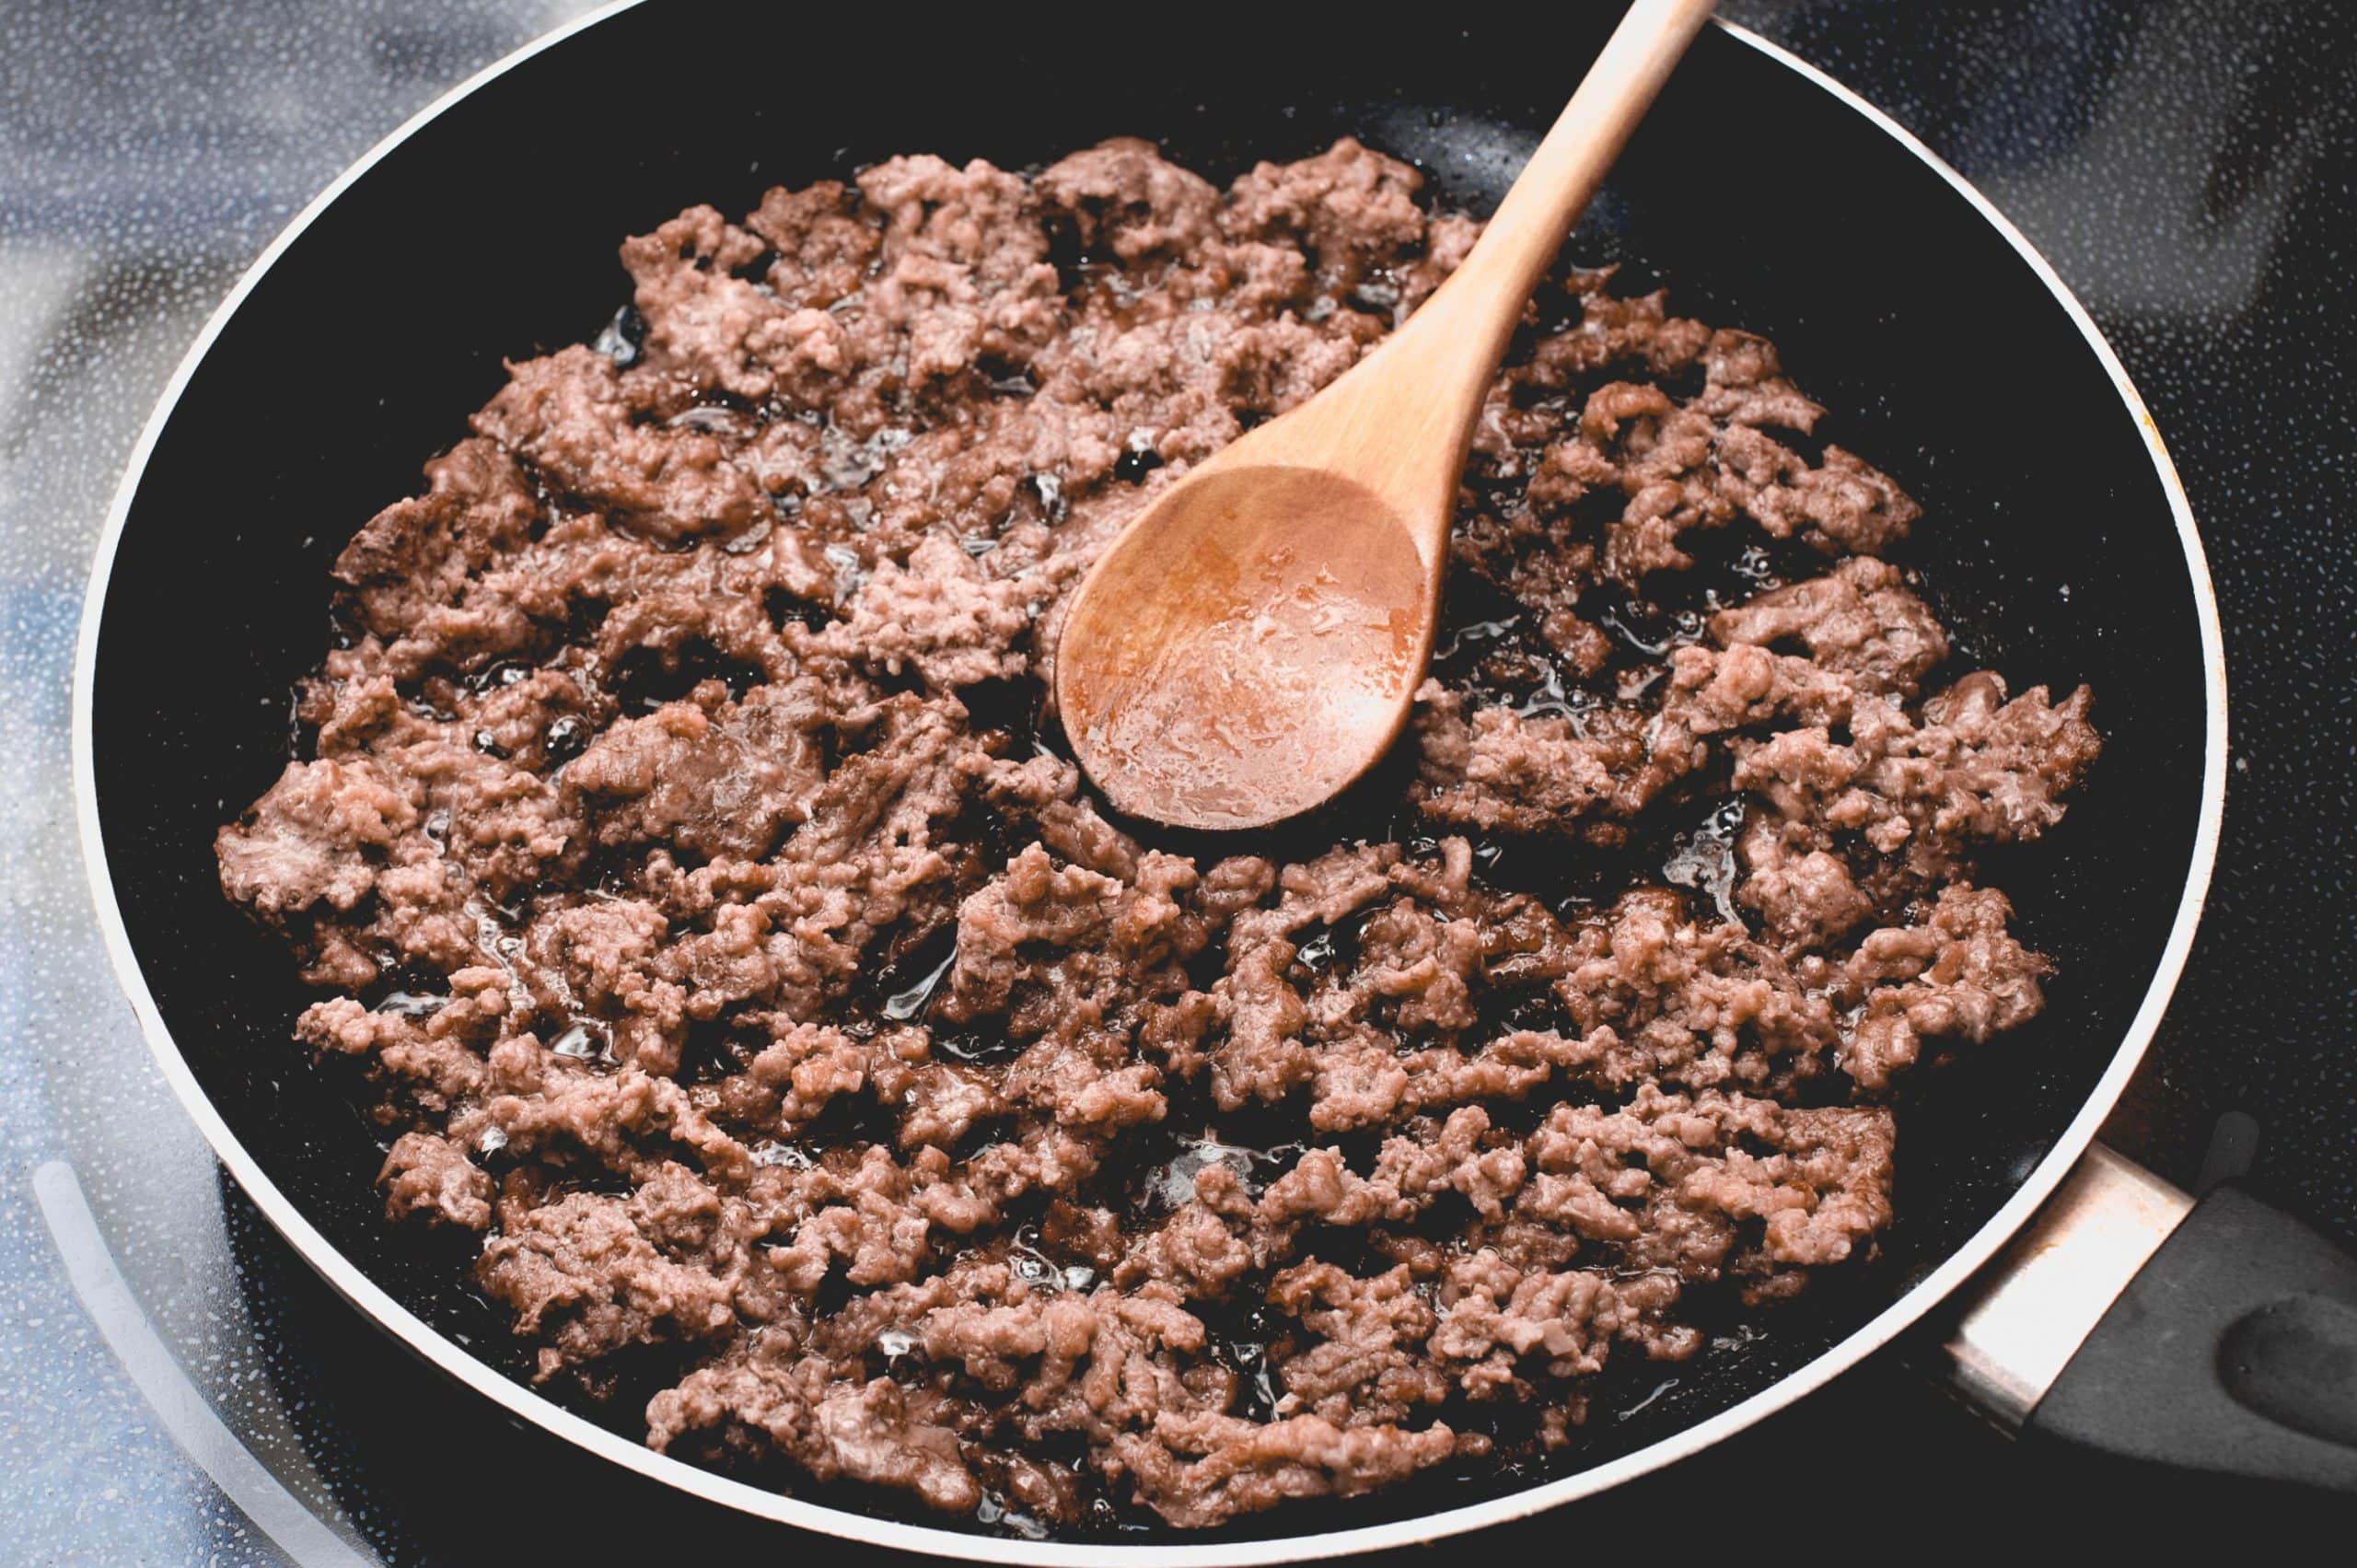 How Long Does Cooked Ground Beef Last?